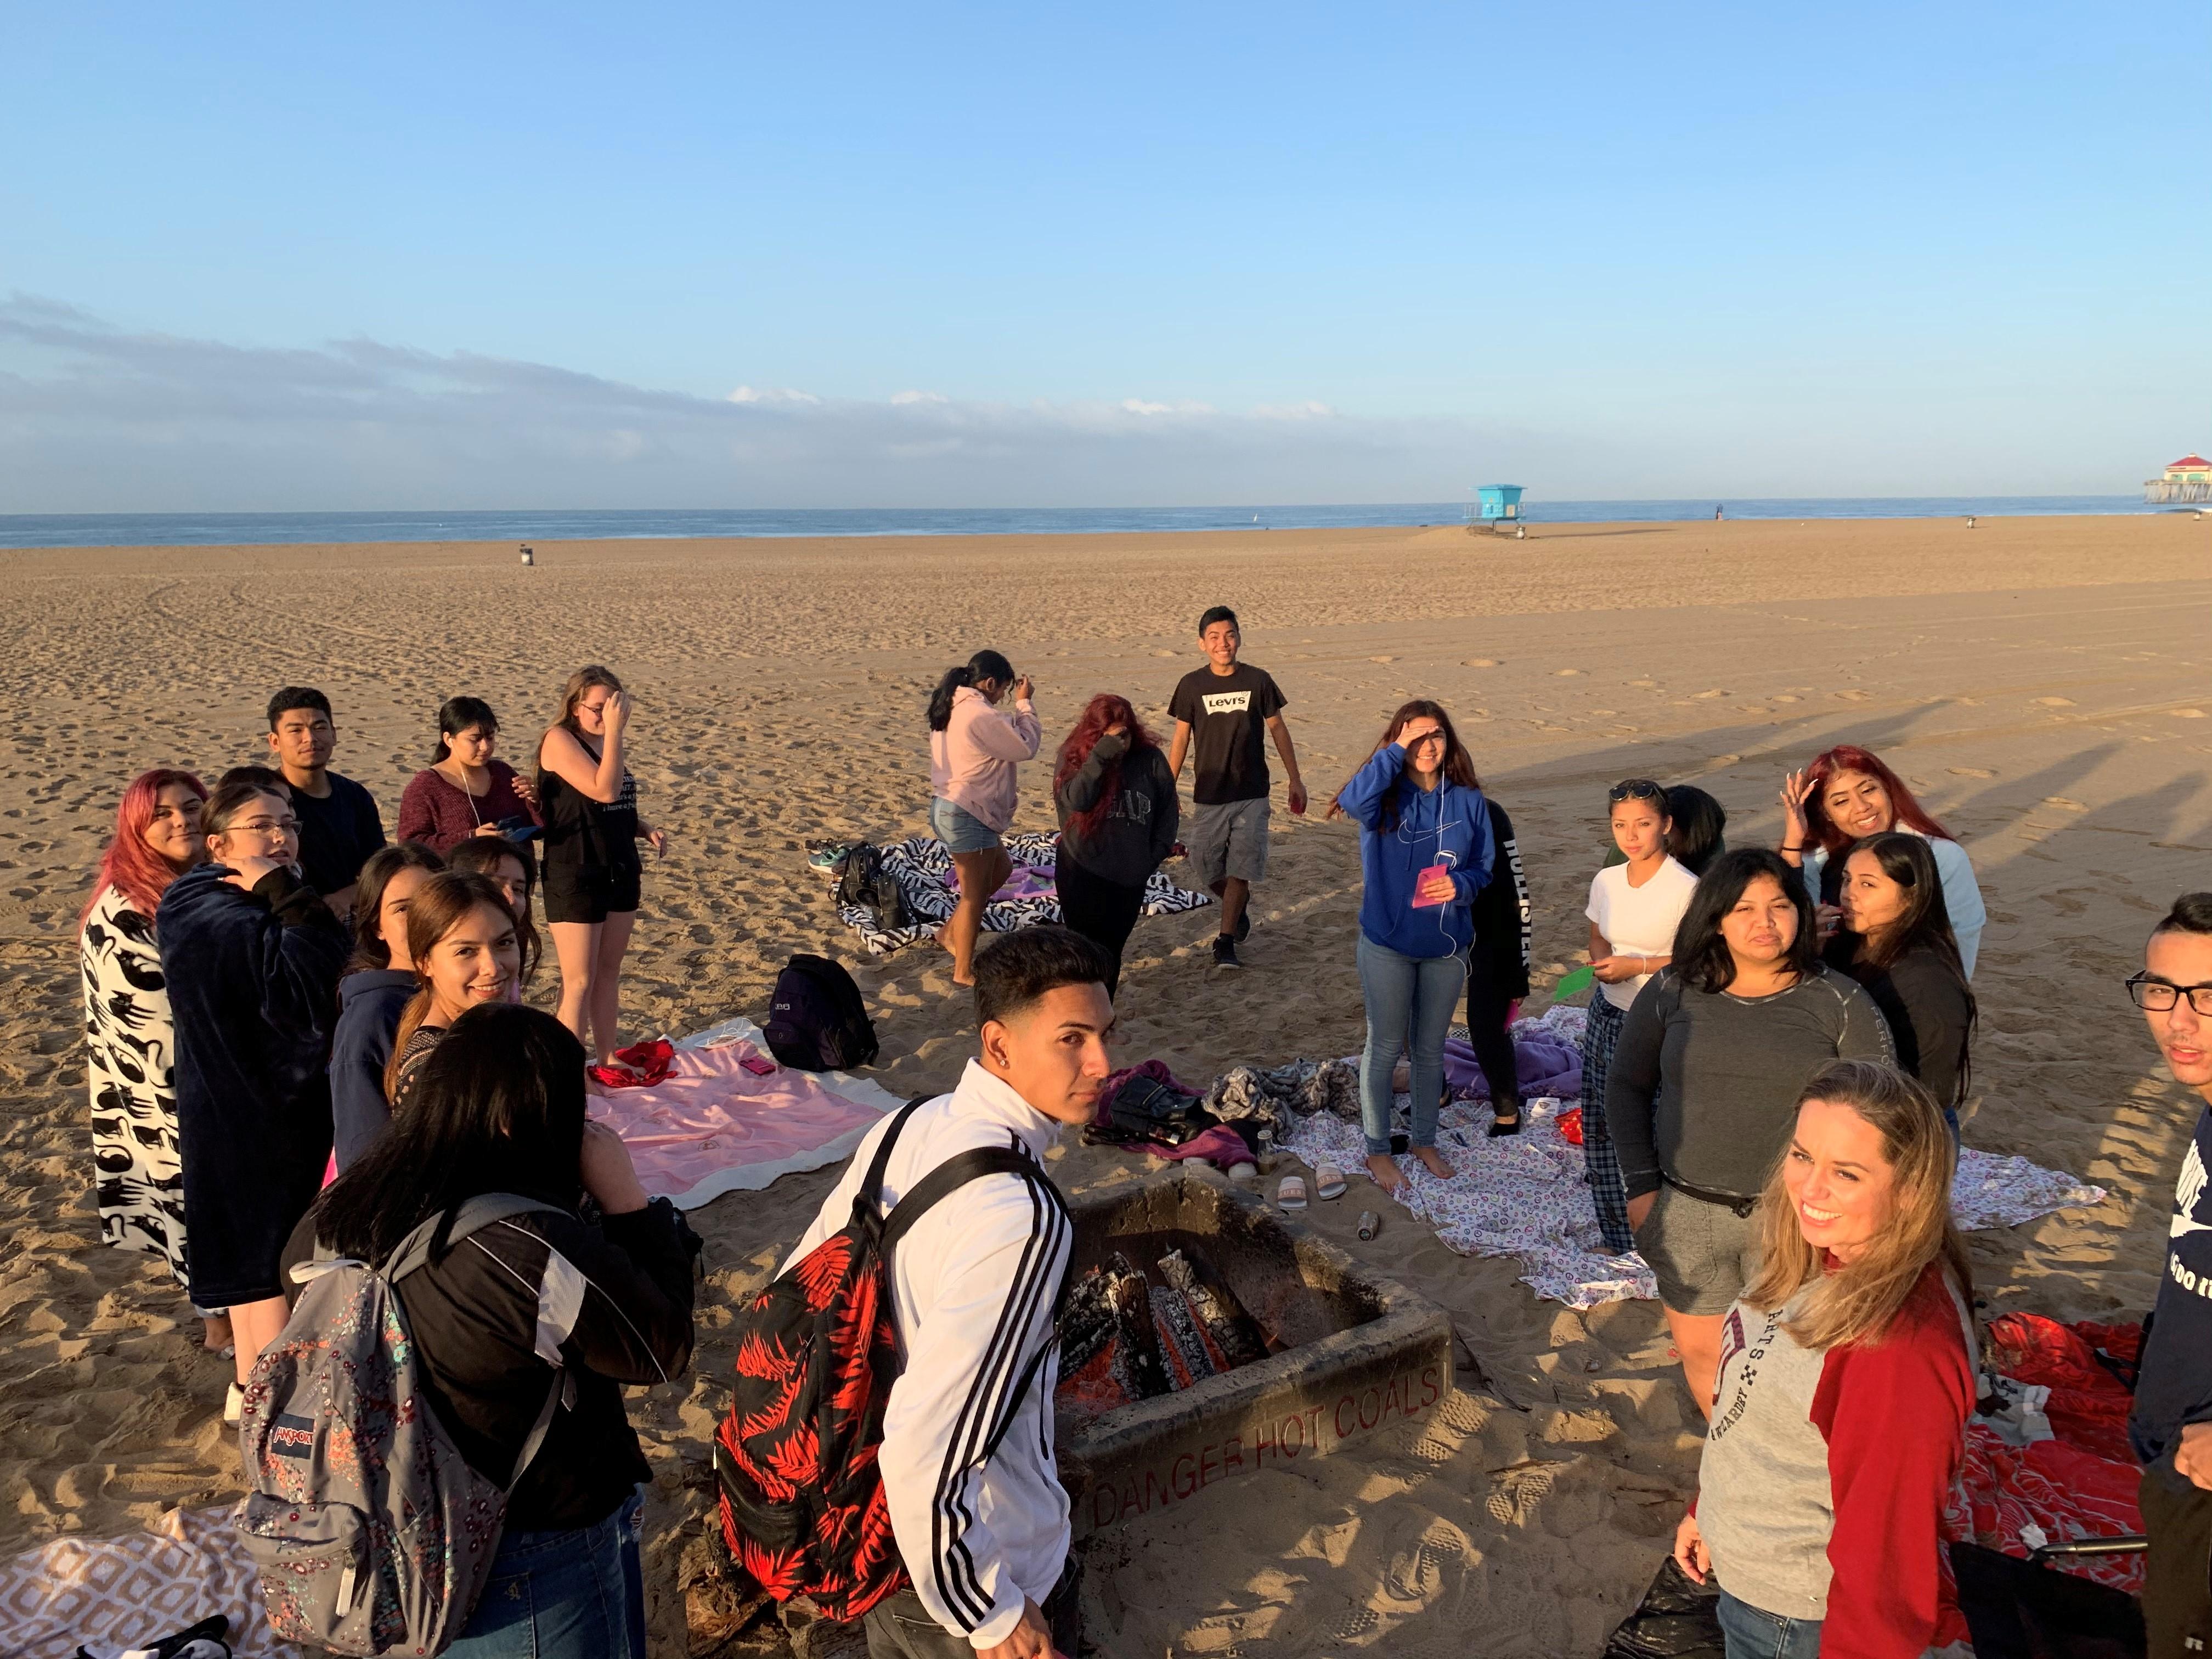 While most of us were still sleeping, SEEO seniors woke up early in the morning to celebrate the start of their final year of high school. #proud2bepusd #SEEO #Pomona